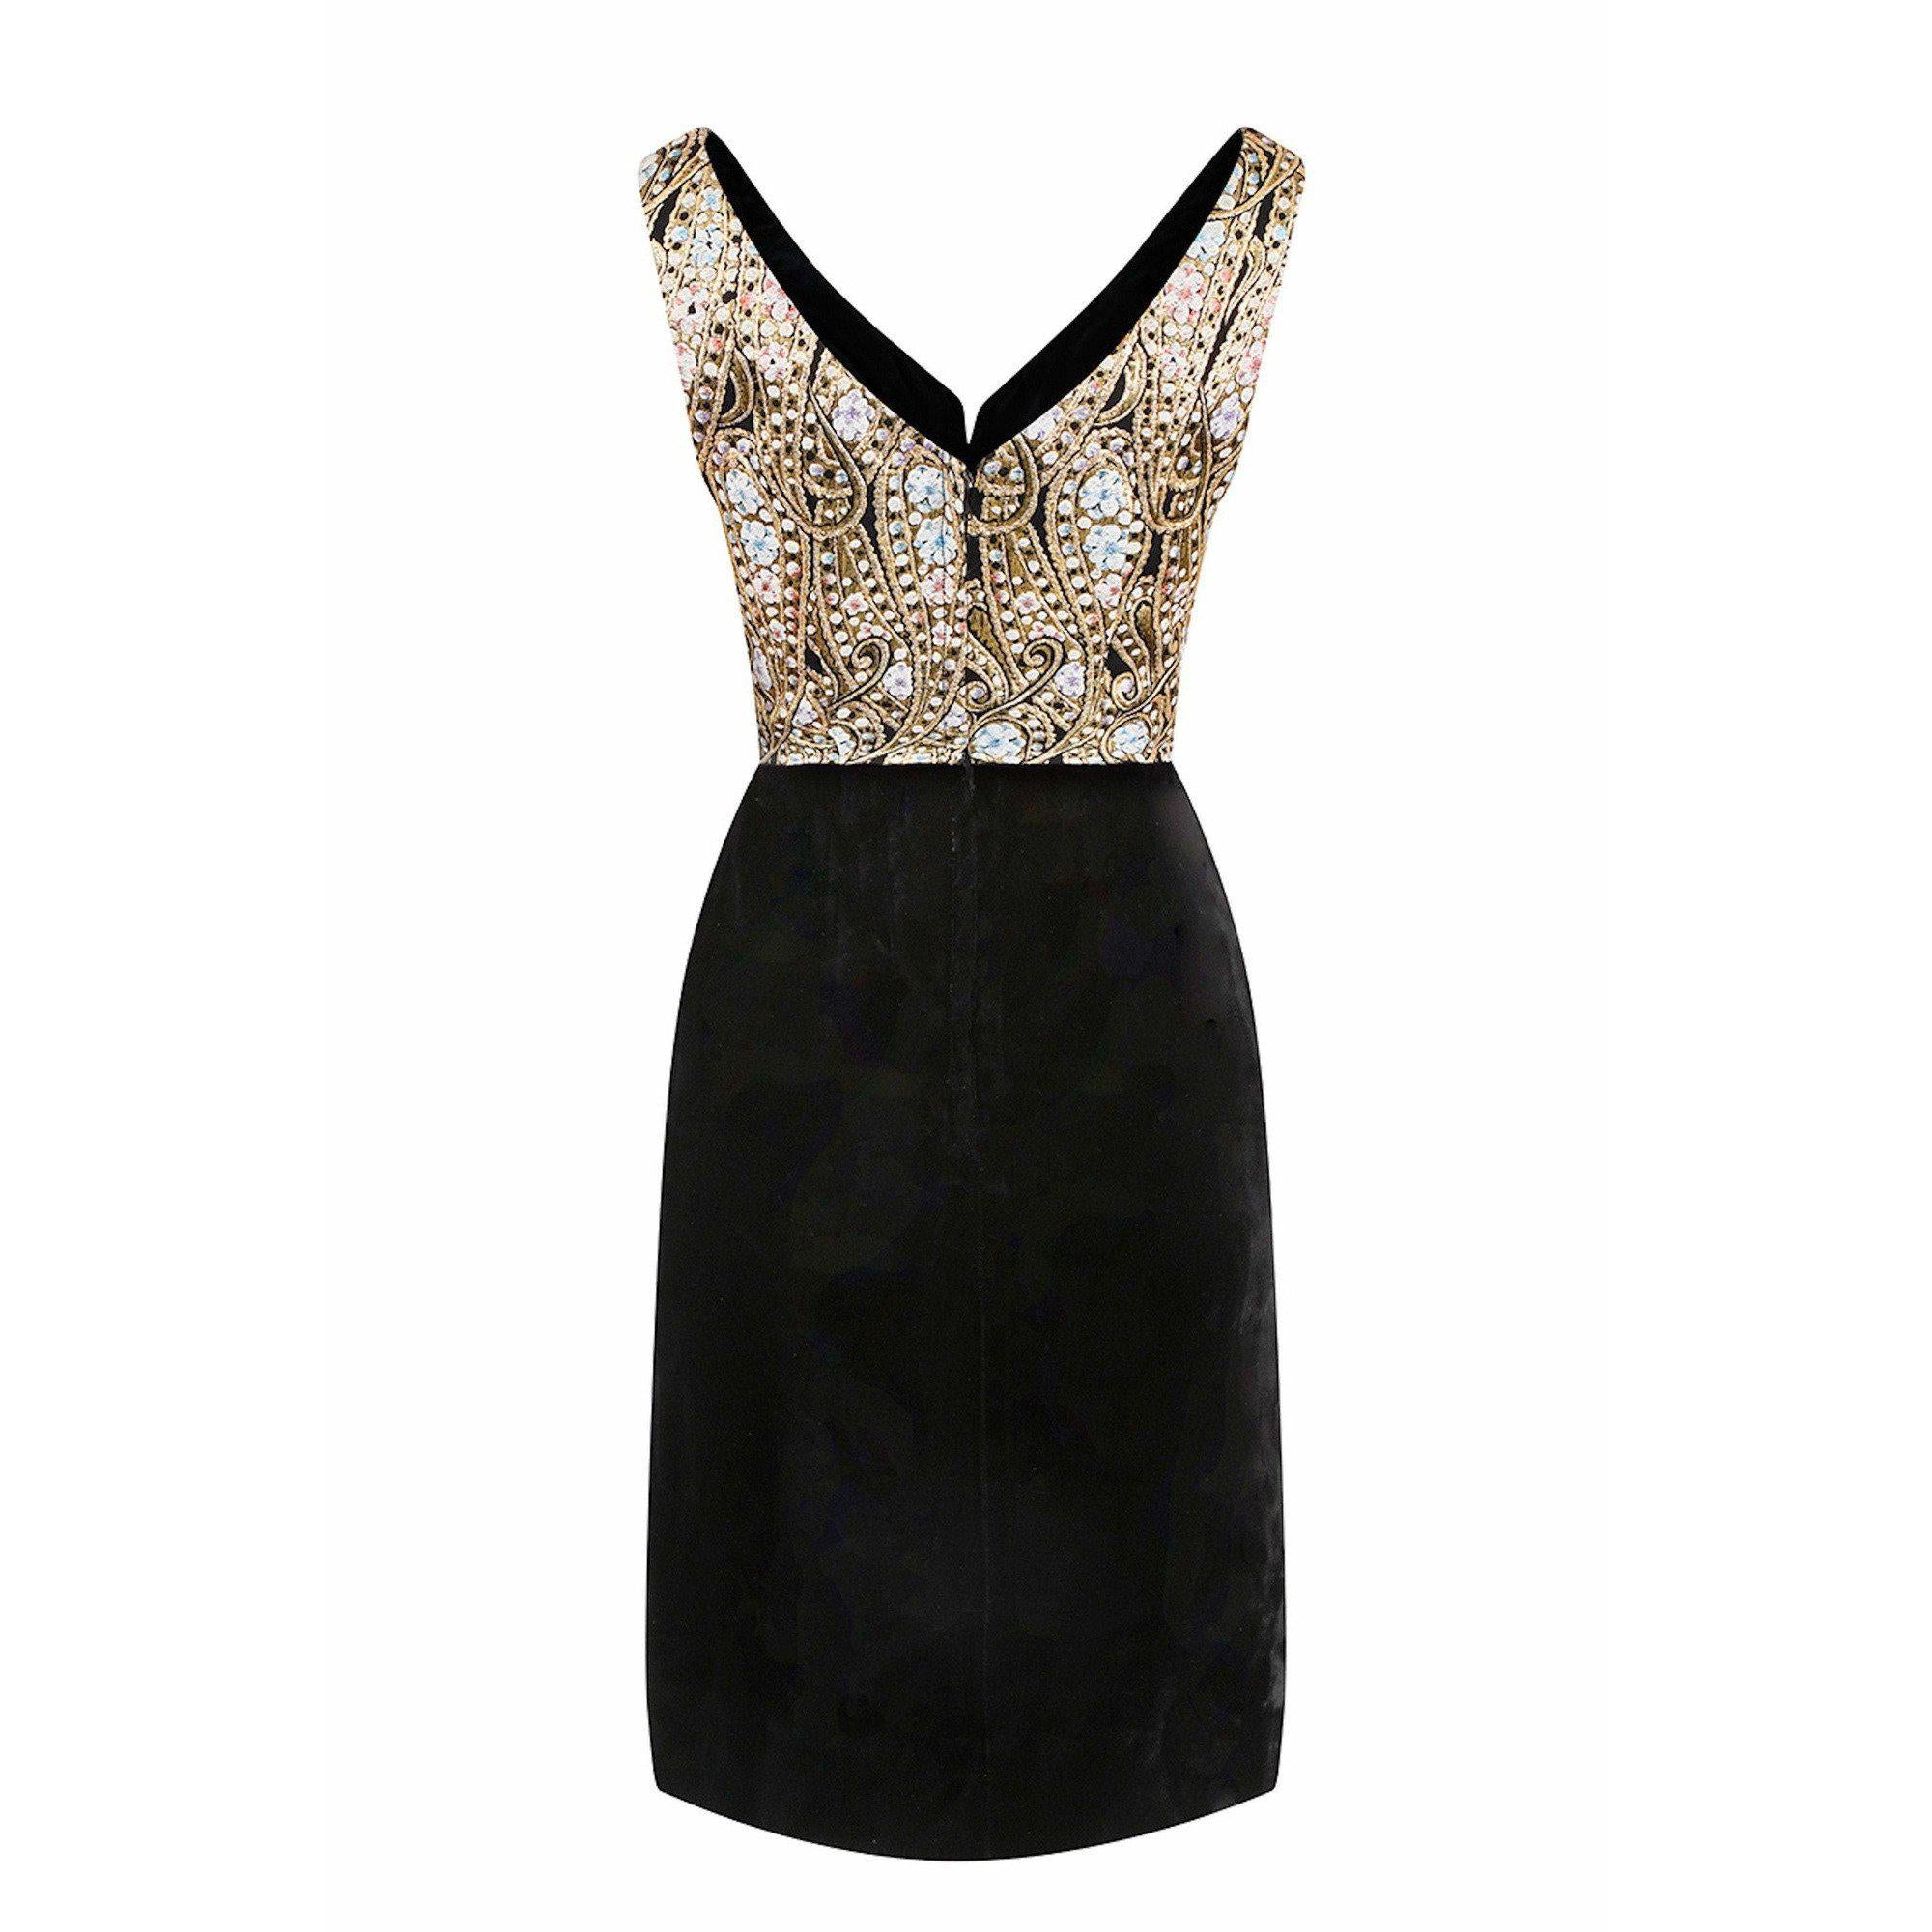 1960s Black Velvet and Gold Lamé Cocktail Dress With Bow Detail